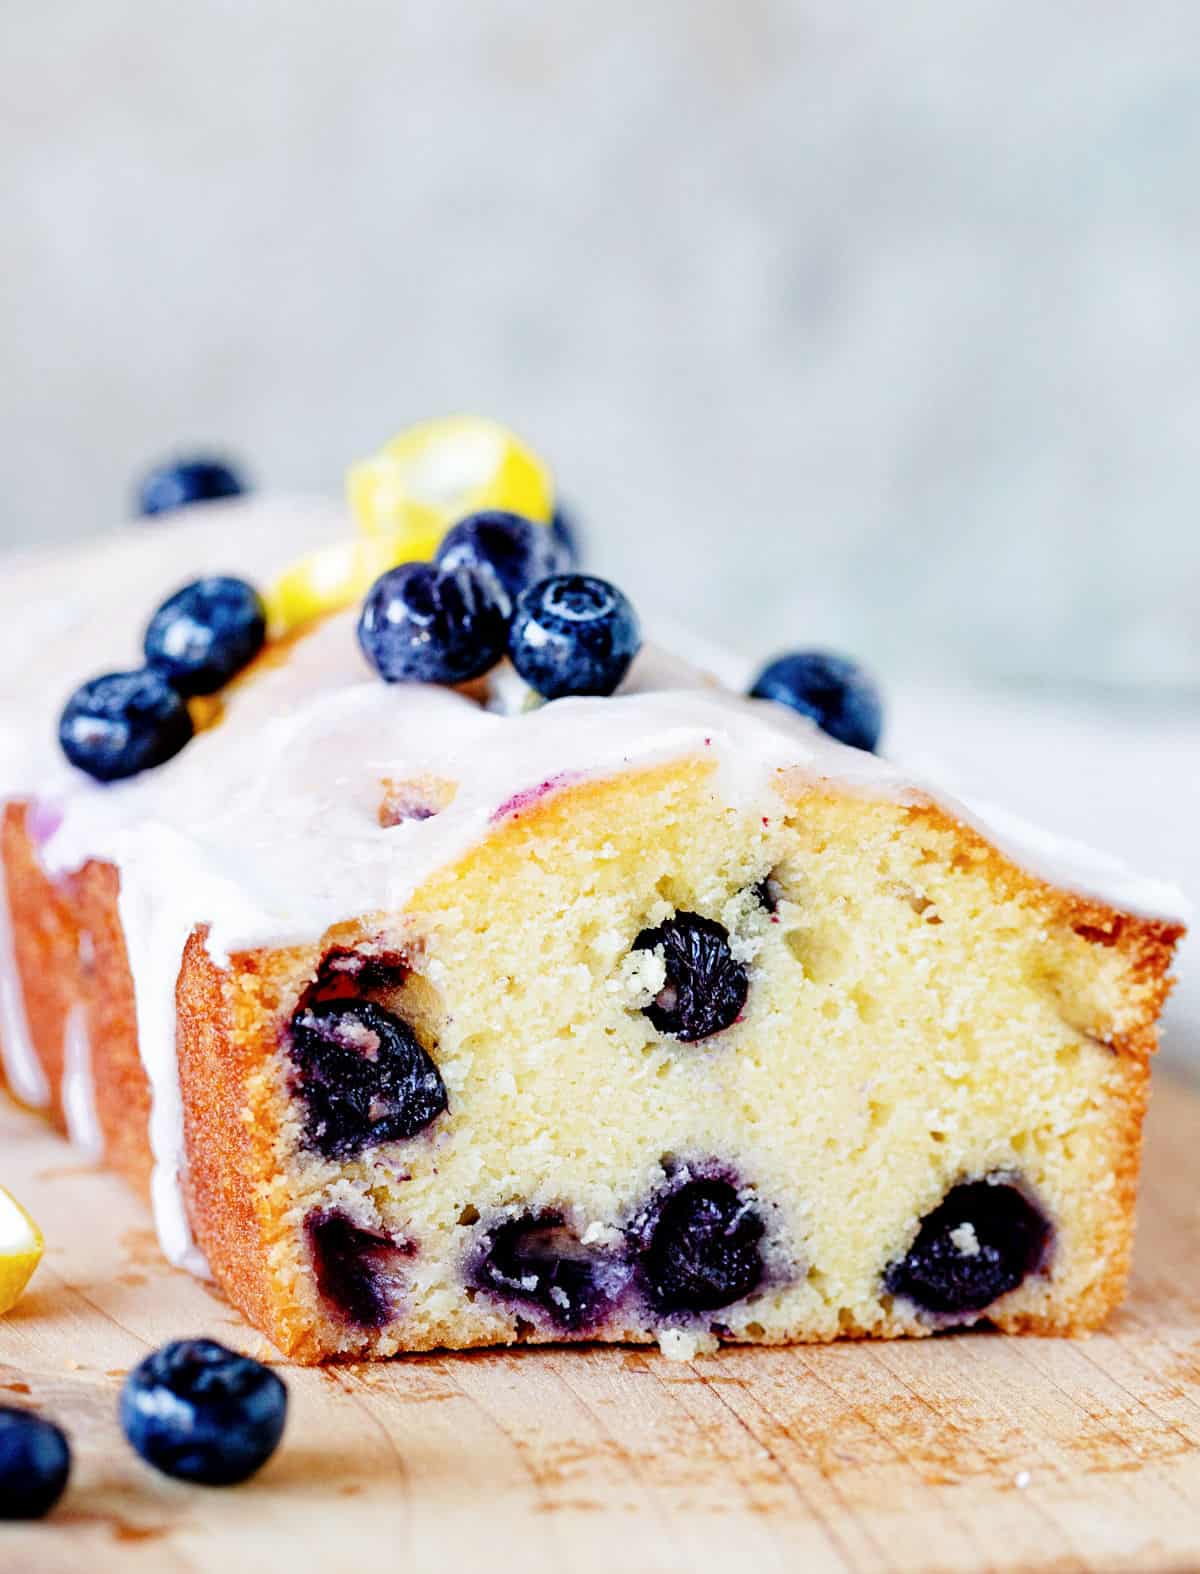 Glazed blueberry pound cake with front cut on wooden board, blueberries around, grey background